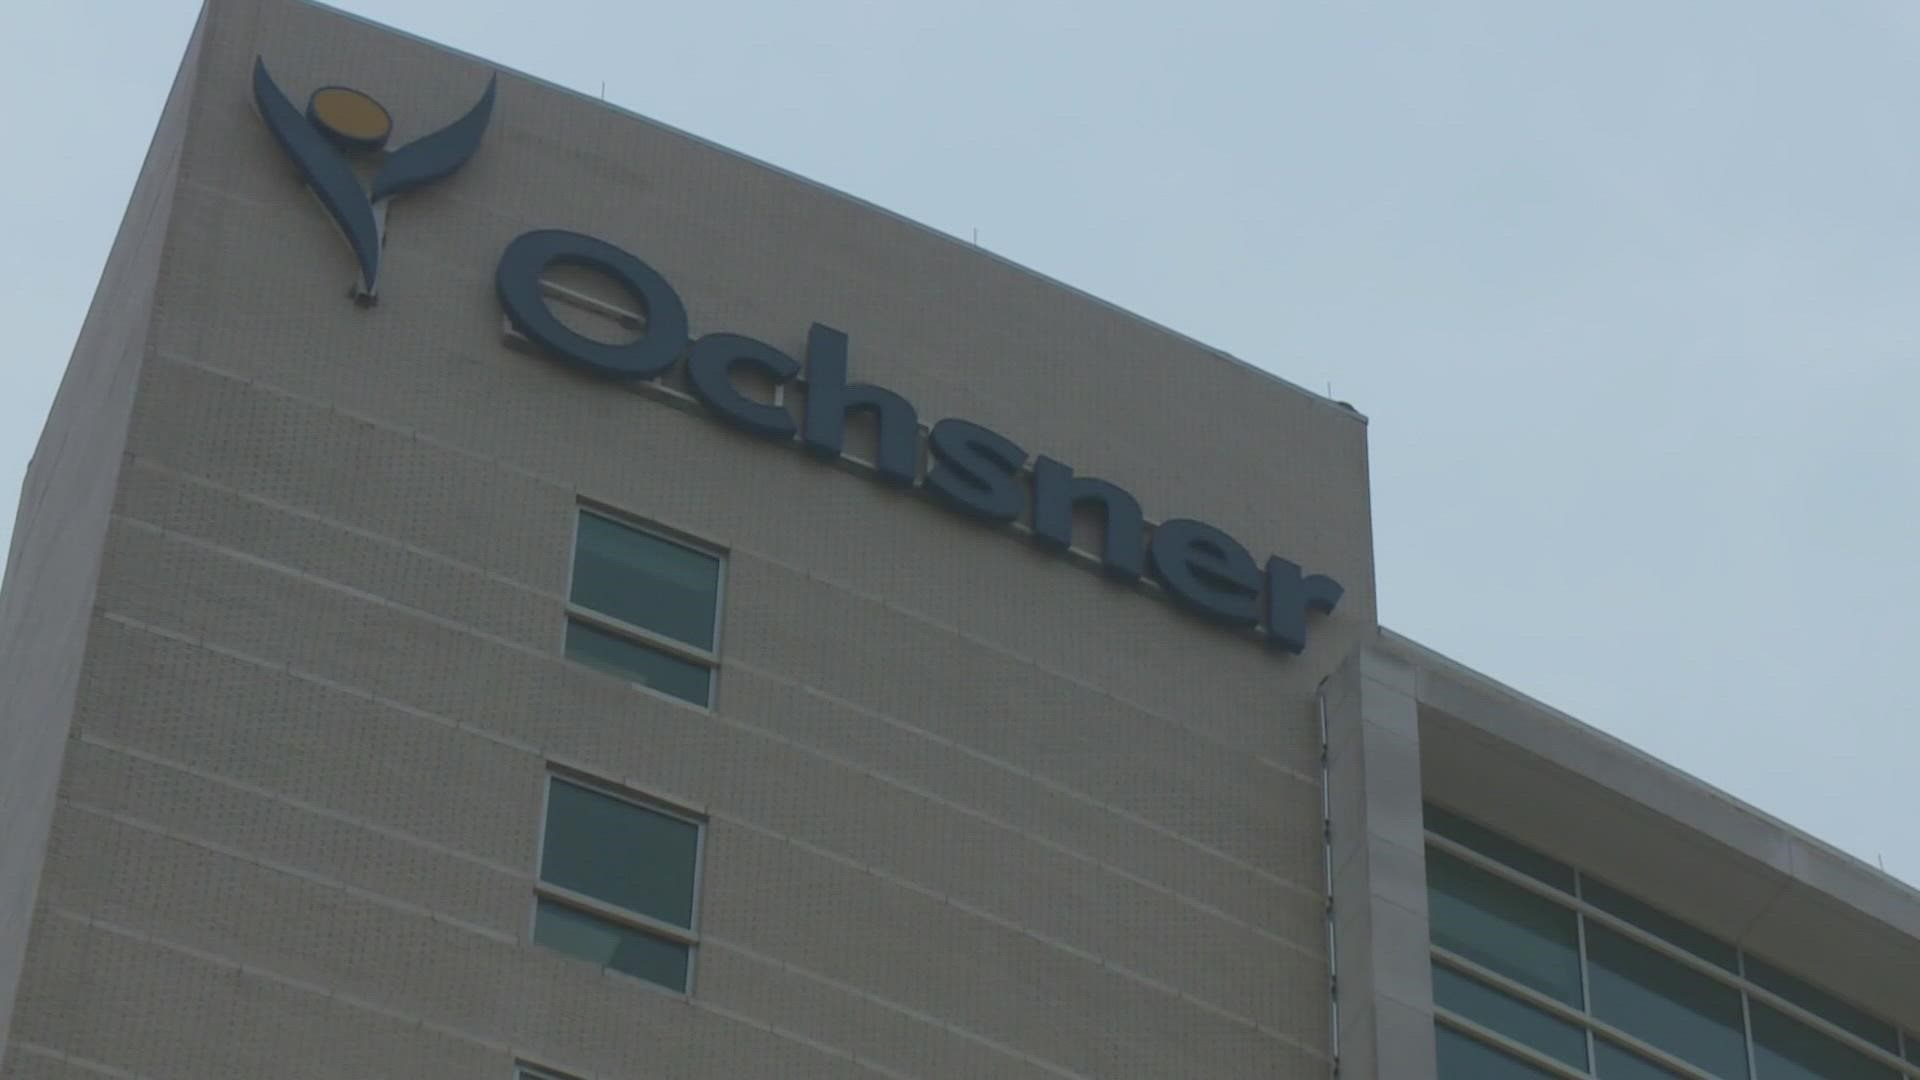 Insurance could go up for some Ochsner employees who wish to keep unvaccinated spouse on their insurance